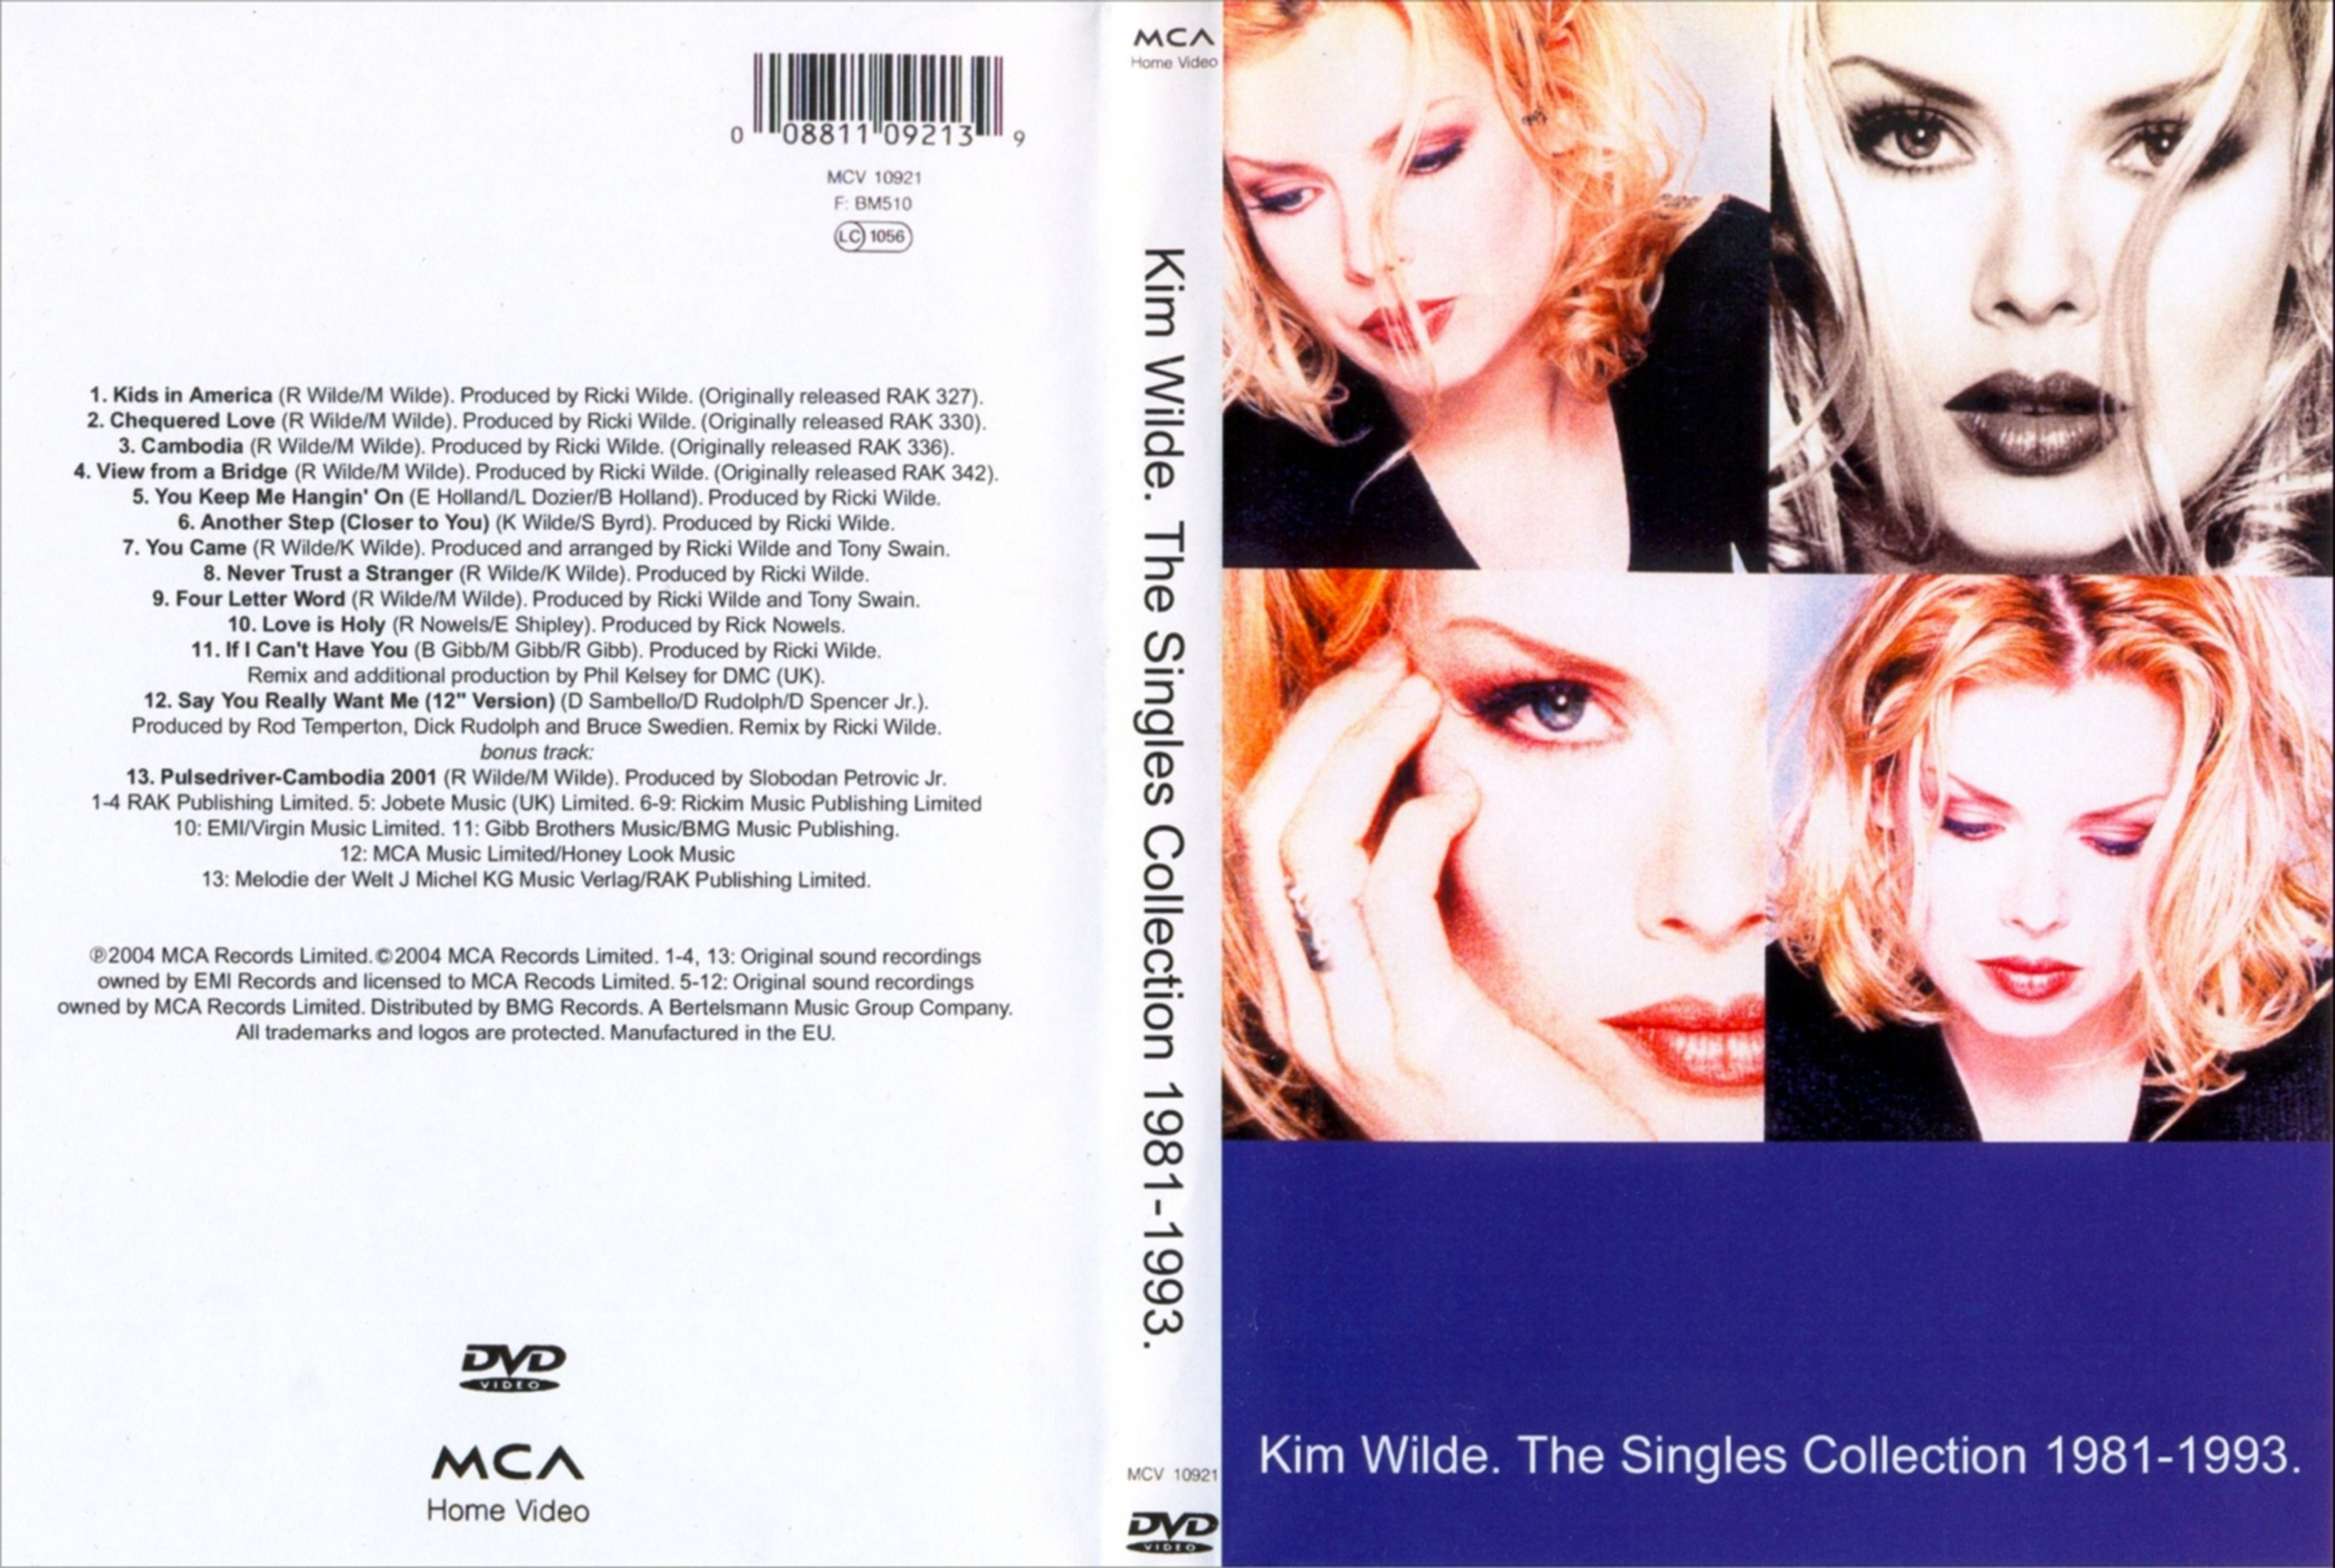 Jaquette DVD Kim Wilde - The Singles Collection 1981-1993